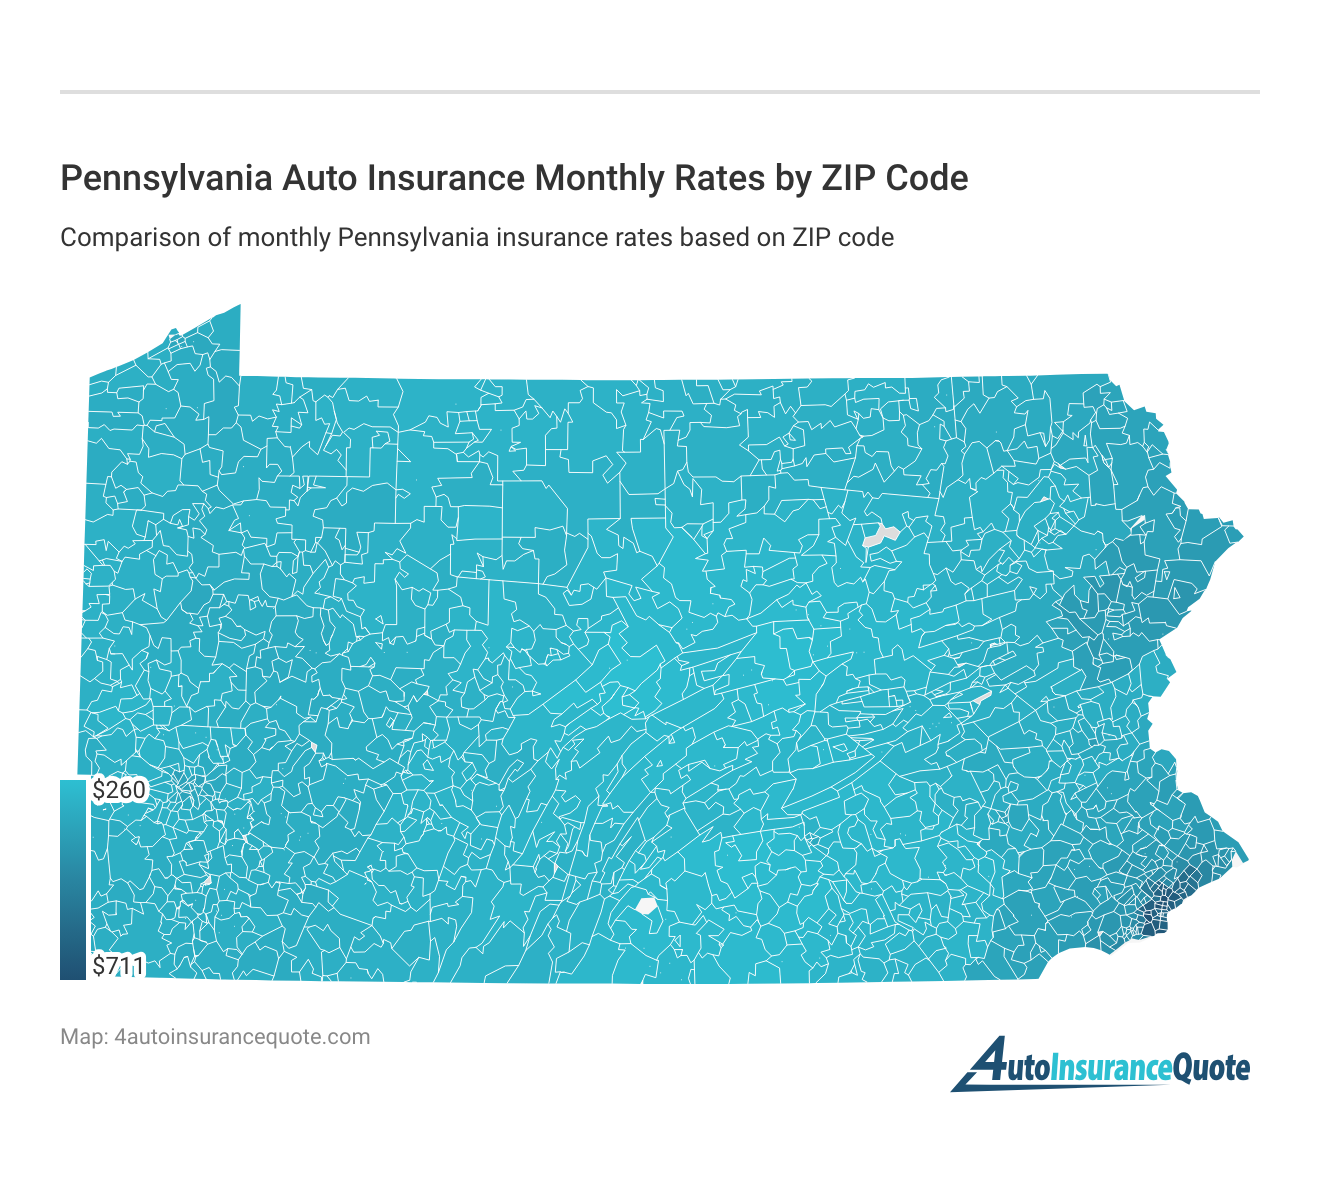 <h3>Pennsylvania Auto Insurance Monthly Rates by ZIP Code</h3>